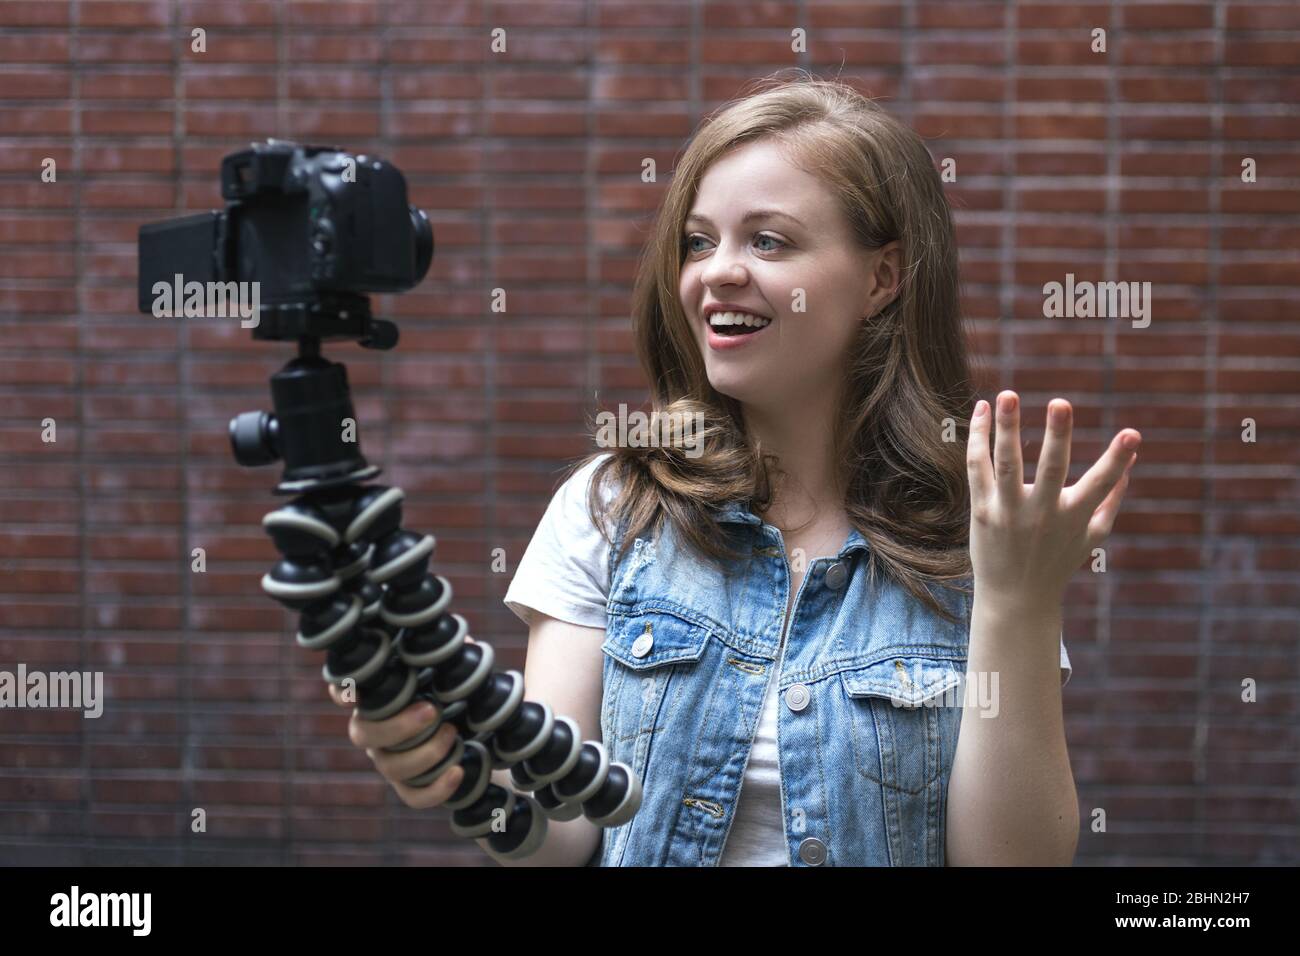 Smiling young caucasian girl woman making a video blog (vlog) with camera near brick wall Stock Photo